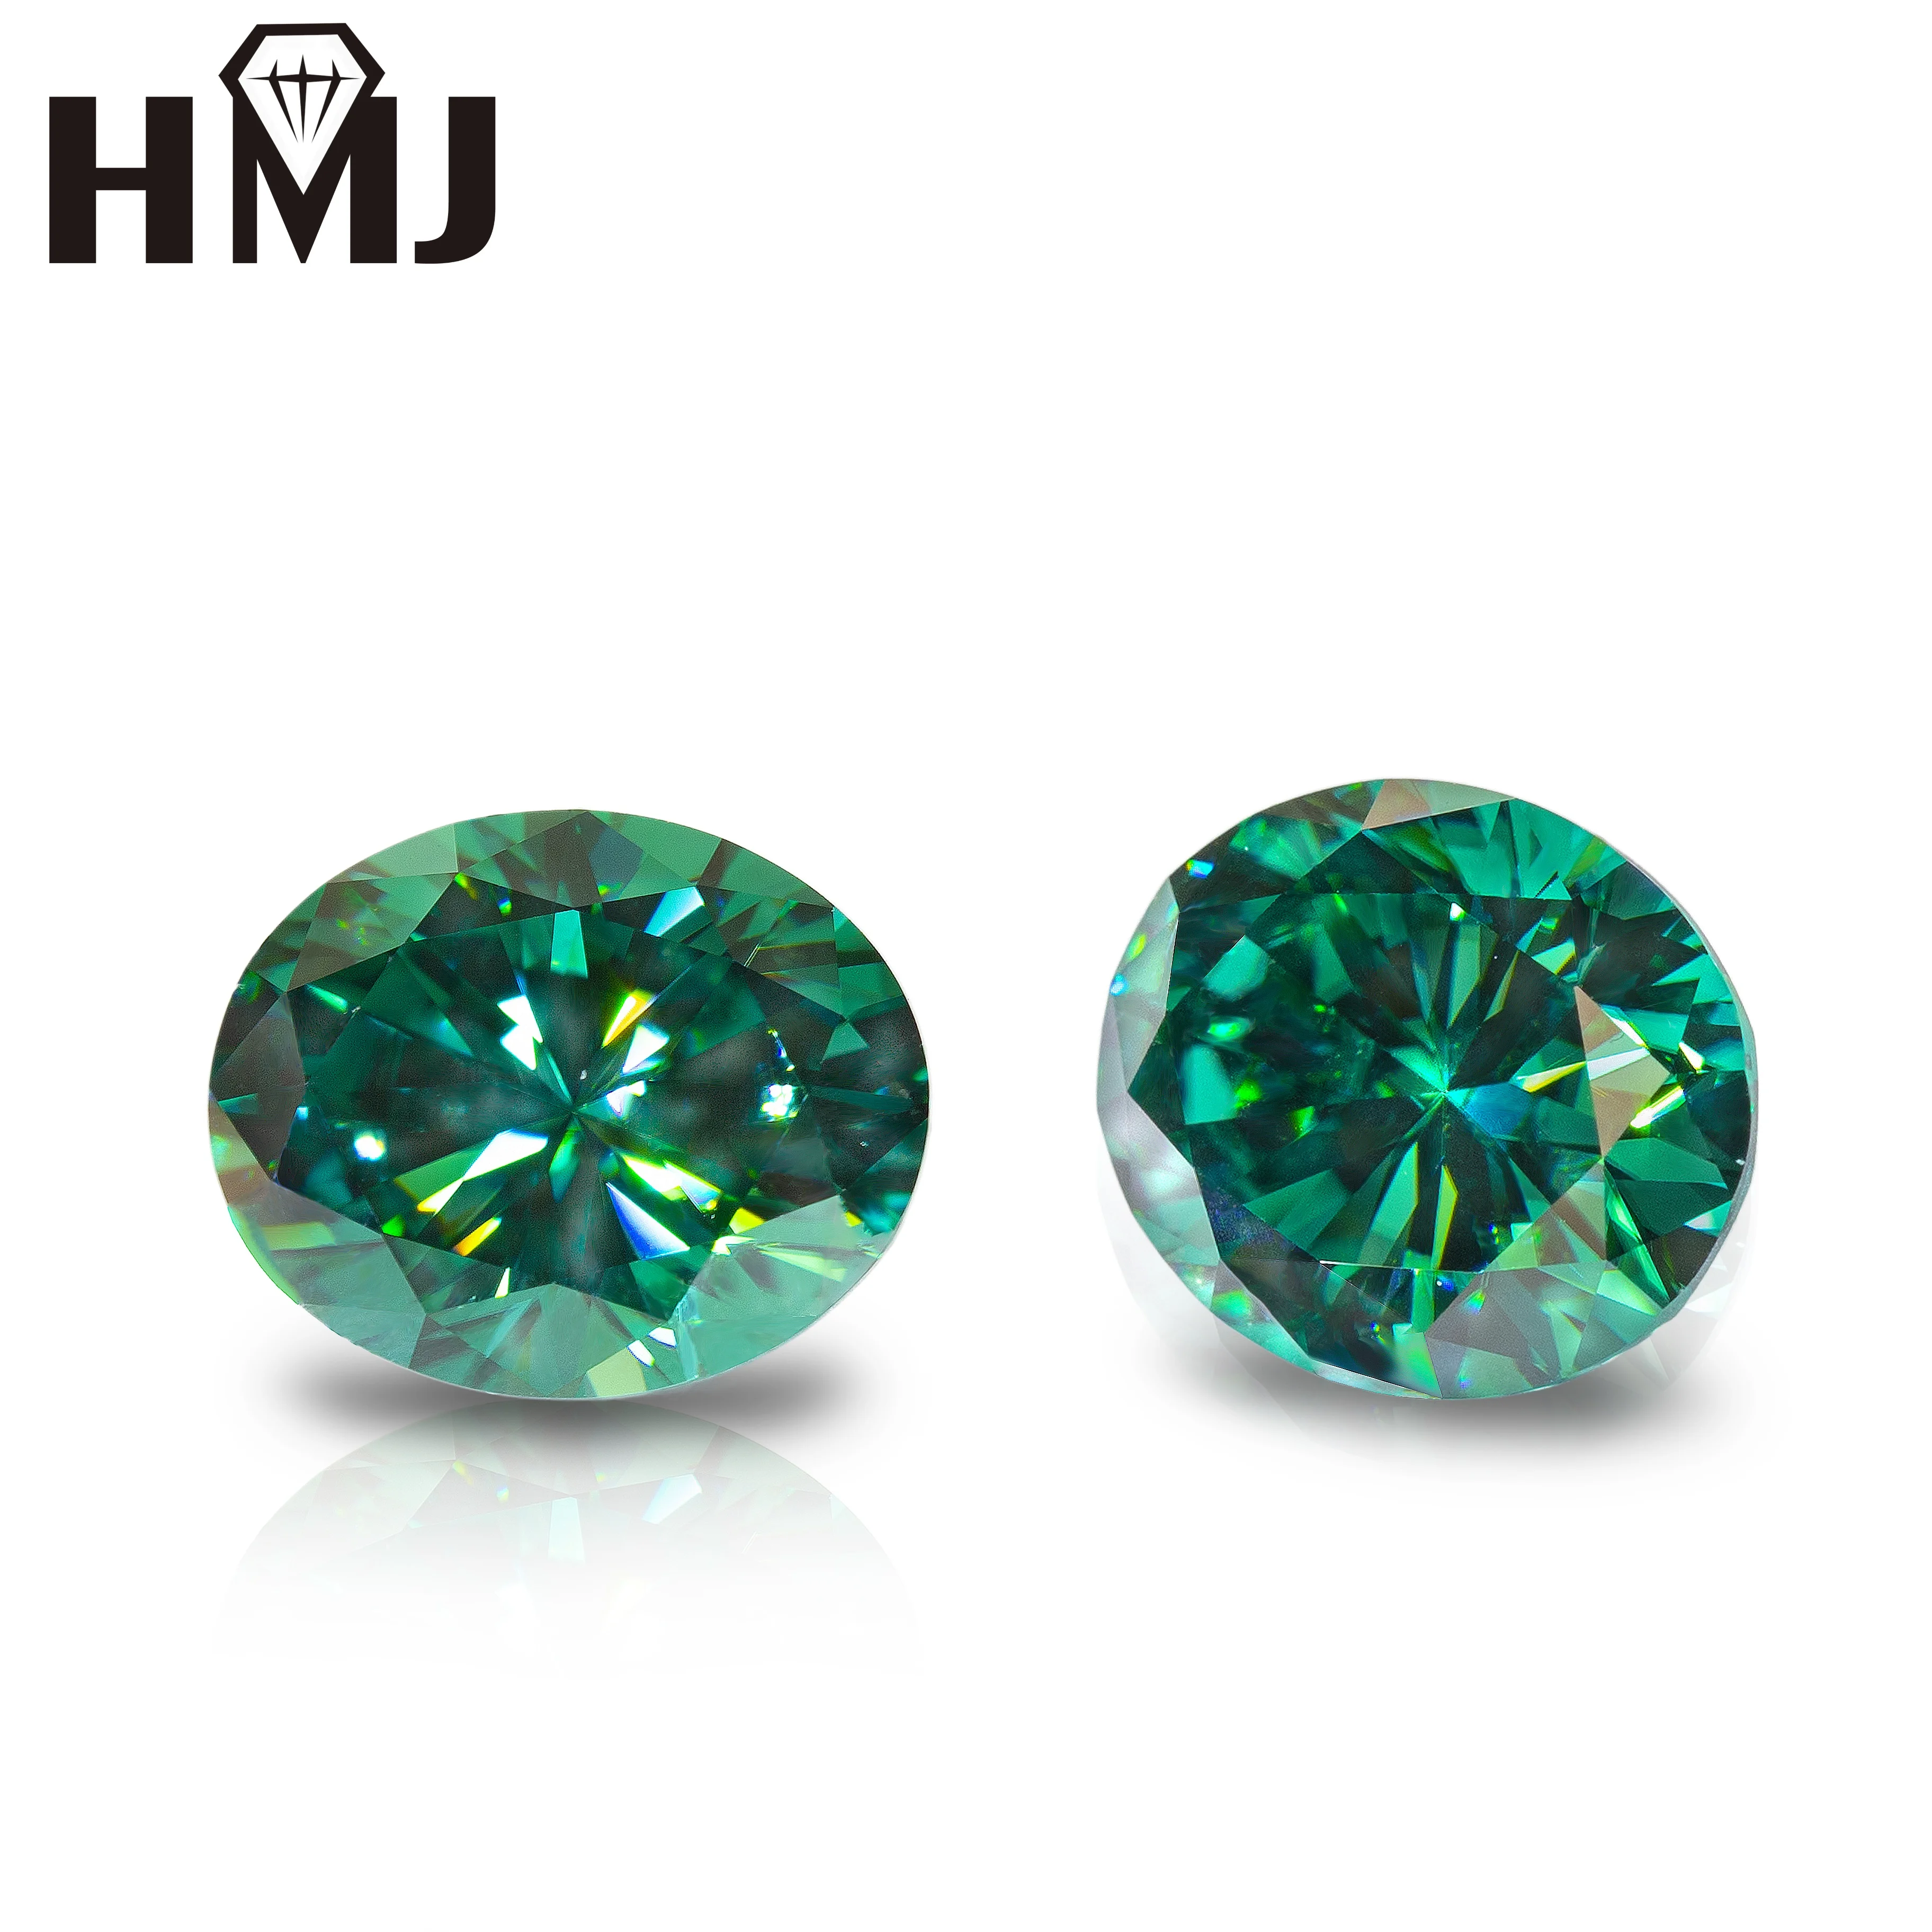 

HMJ 0.3-8 CT Moissanite Loose Stones-Oval Green VVS1 Clarity and Excellent Cut with GRA Brilliant Alternative To Manmade Diamond